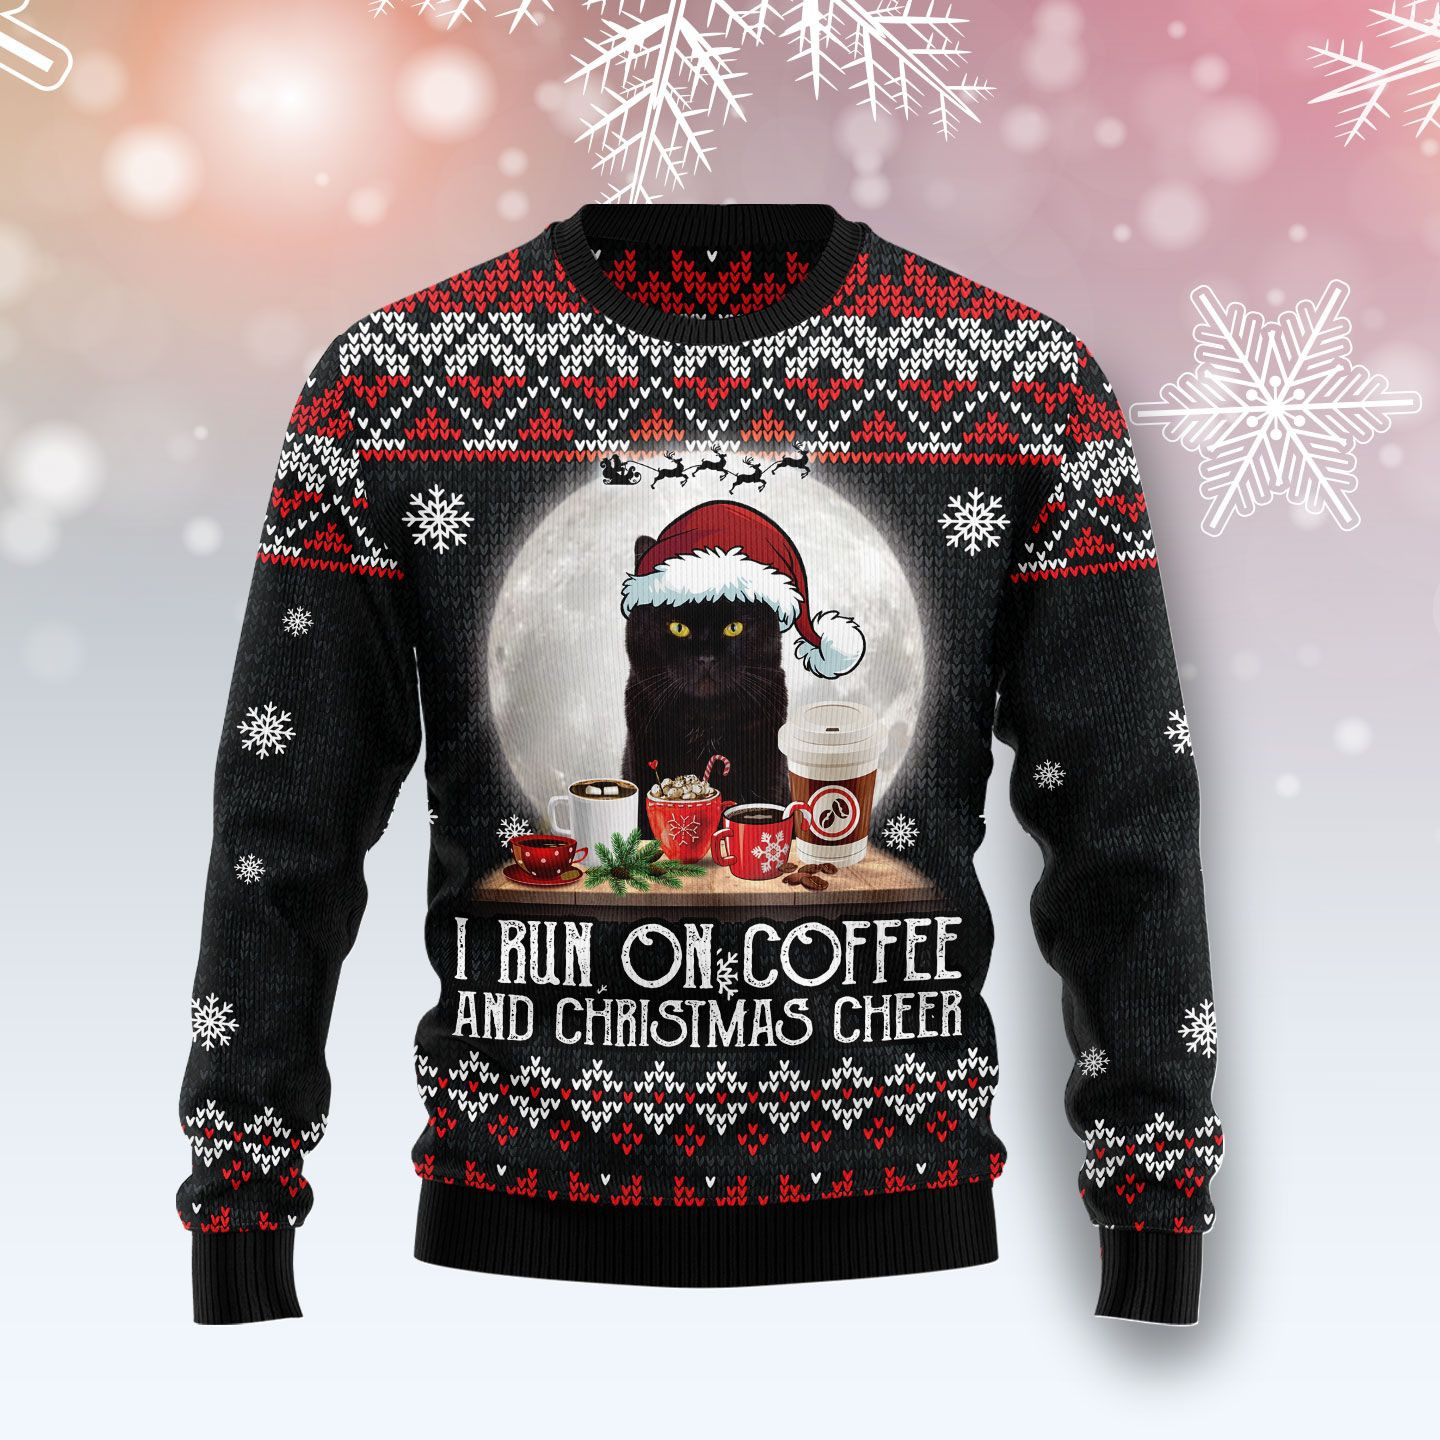 Black Cat Run On Coffee Ugly Christmas Sweater, Ugly Sweater For Men Women, Holiday Sweater